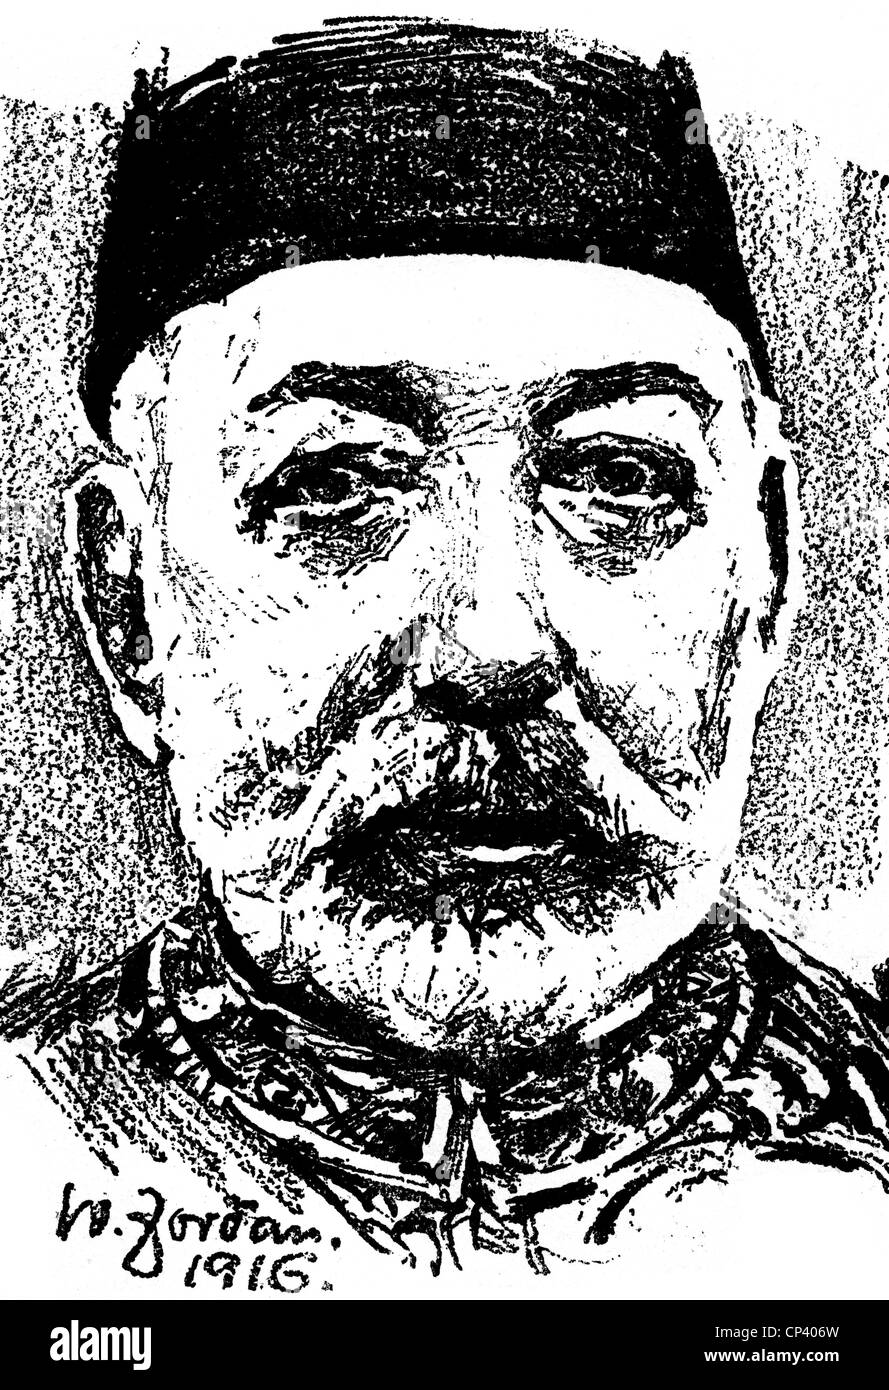 Mehmed V Resad, 2.11.1844 - 3.7.1918, Sultan of the Ottoman Empire 27.4.1909 - 3.7.1918, portrait, drawing by Jordan, 1916, Stock Photo